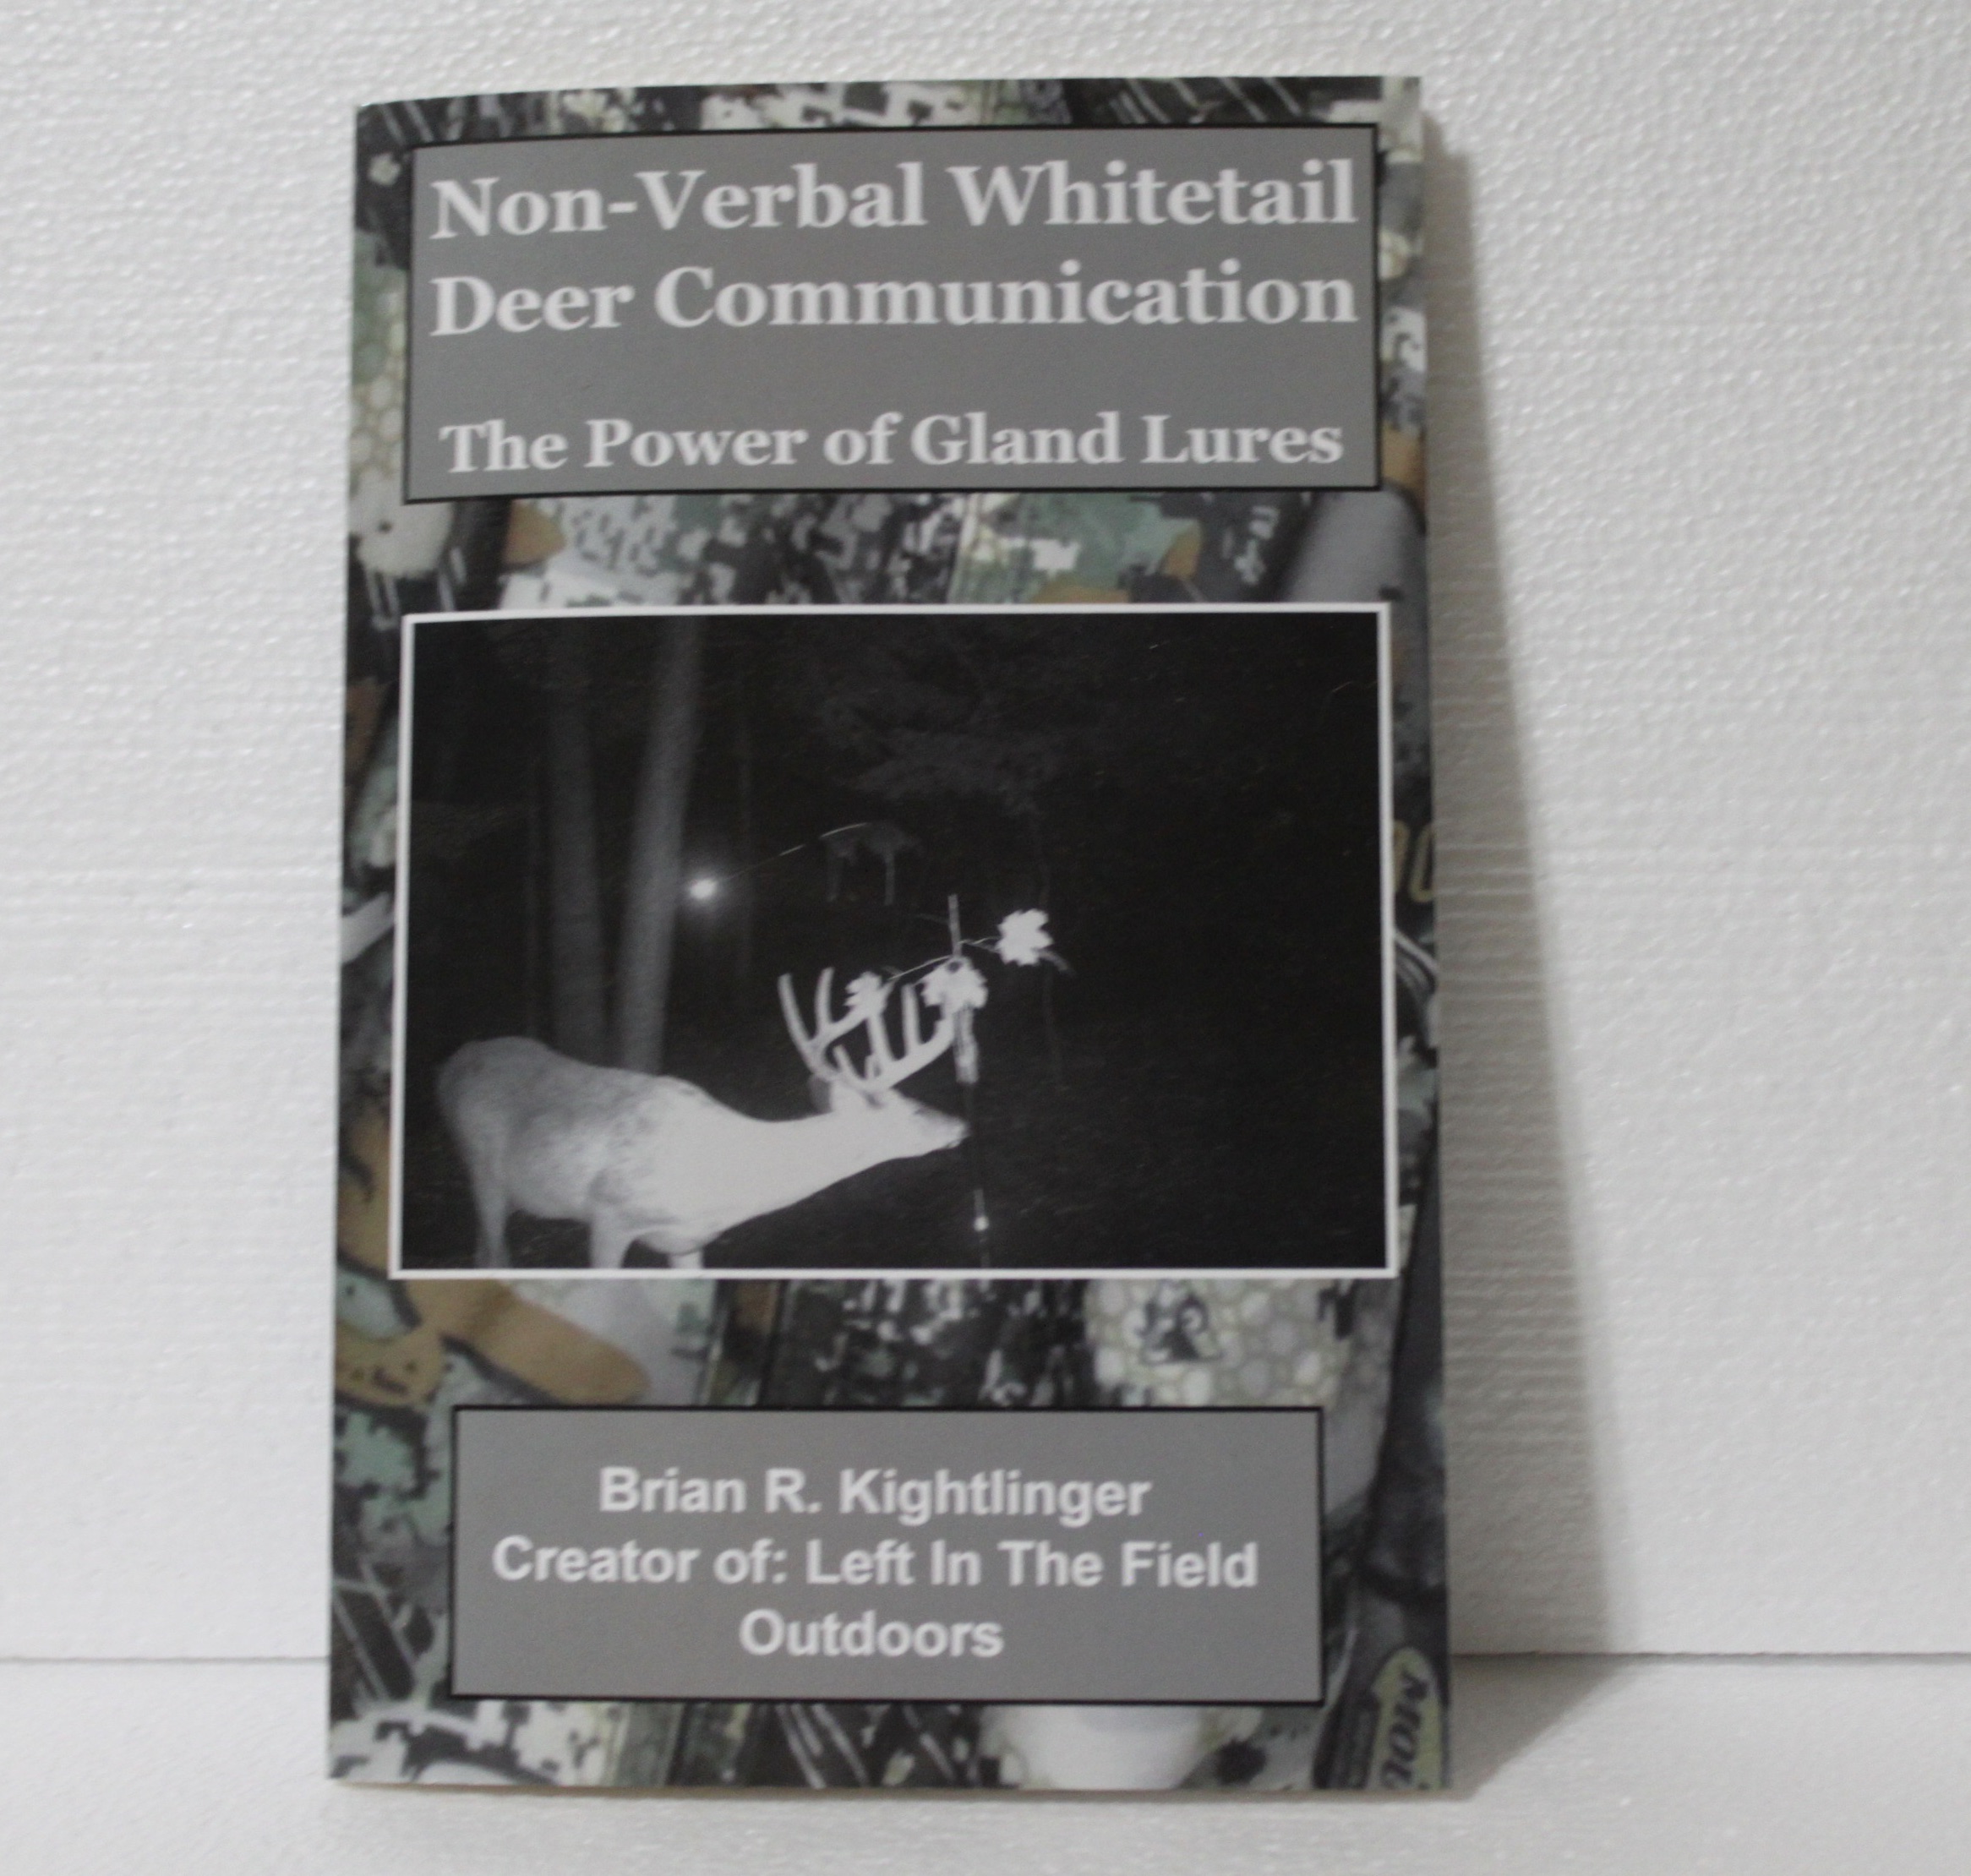 NEW COMBO SPECIAL!! Smokey's “Wicked Wicks” Compound & New Book by Brian R.  Kightlinger: “Non-Verbal Whitetail Deer Communication- The Power of Gland  Lures”